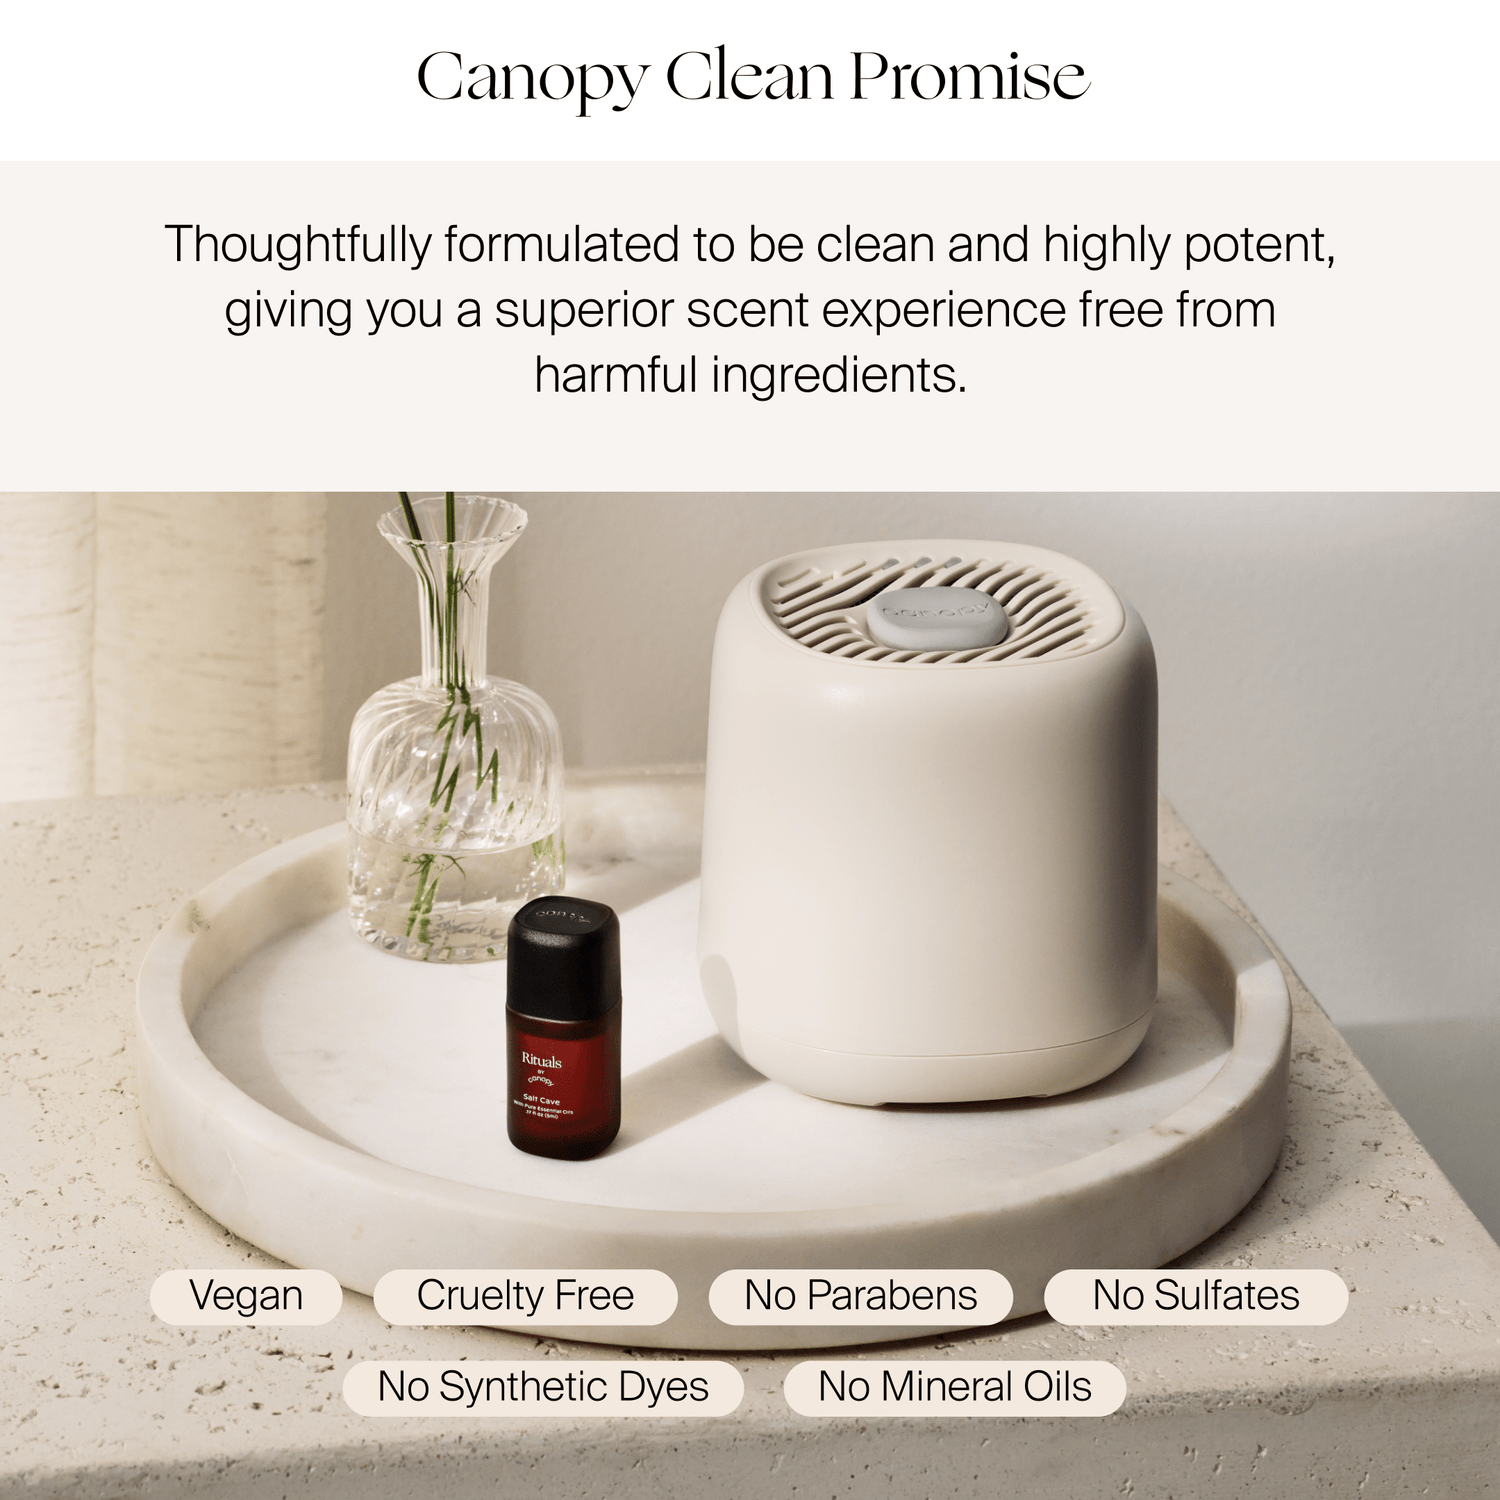 Essential oil diffusers  The best aromatherapy diffusers to try